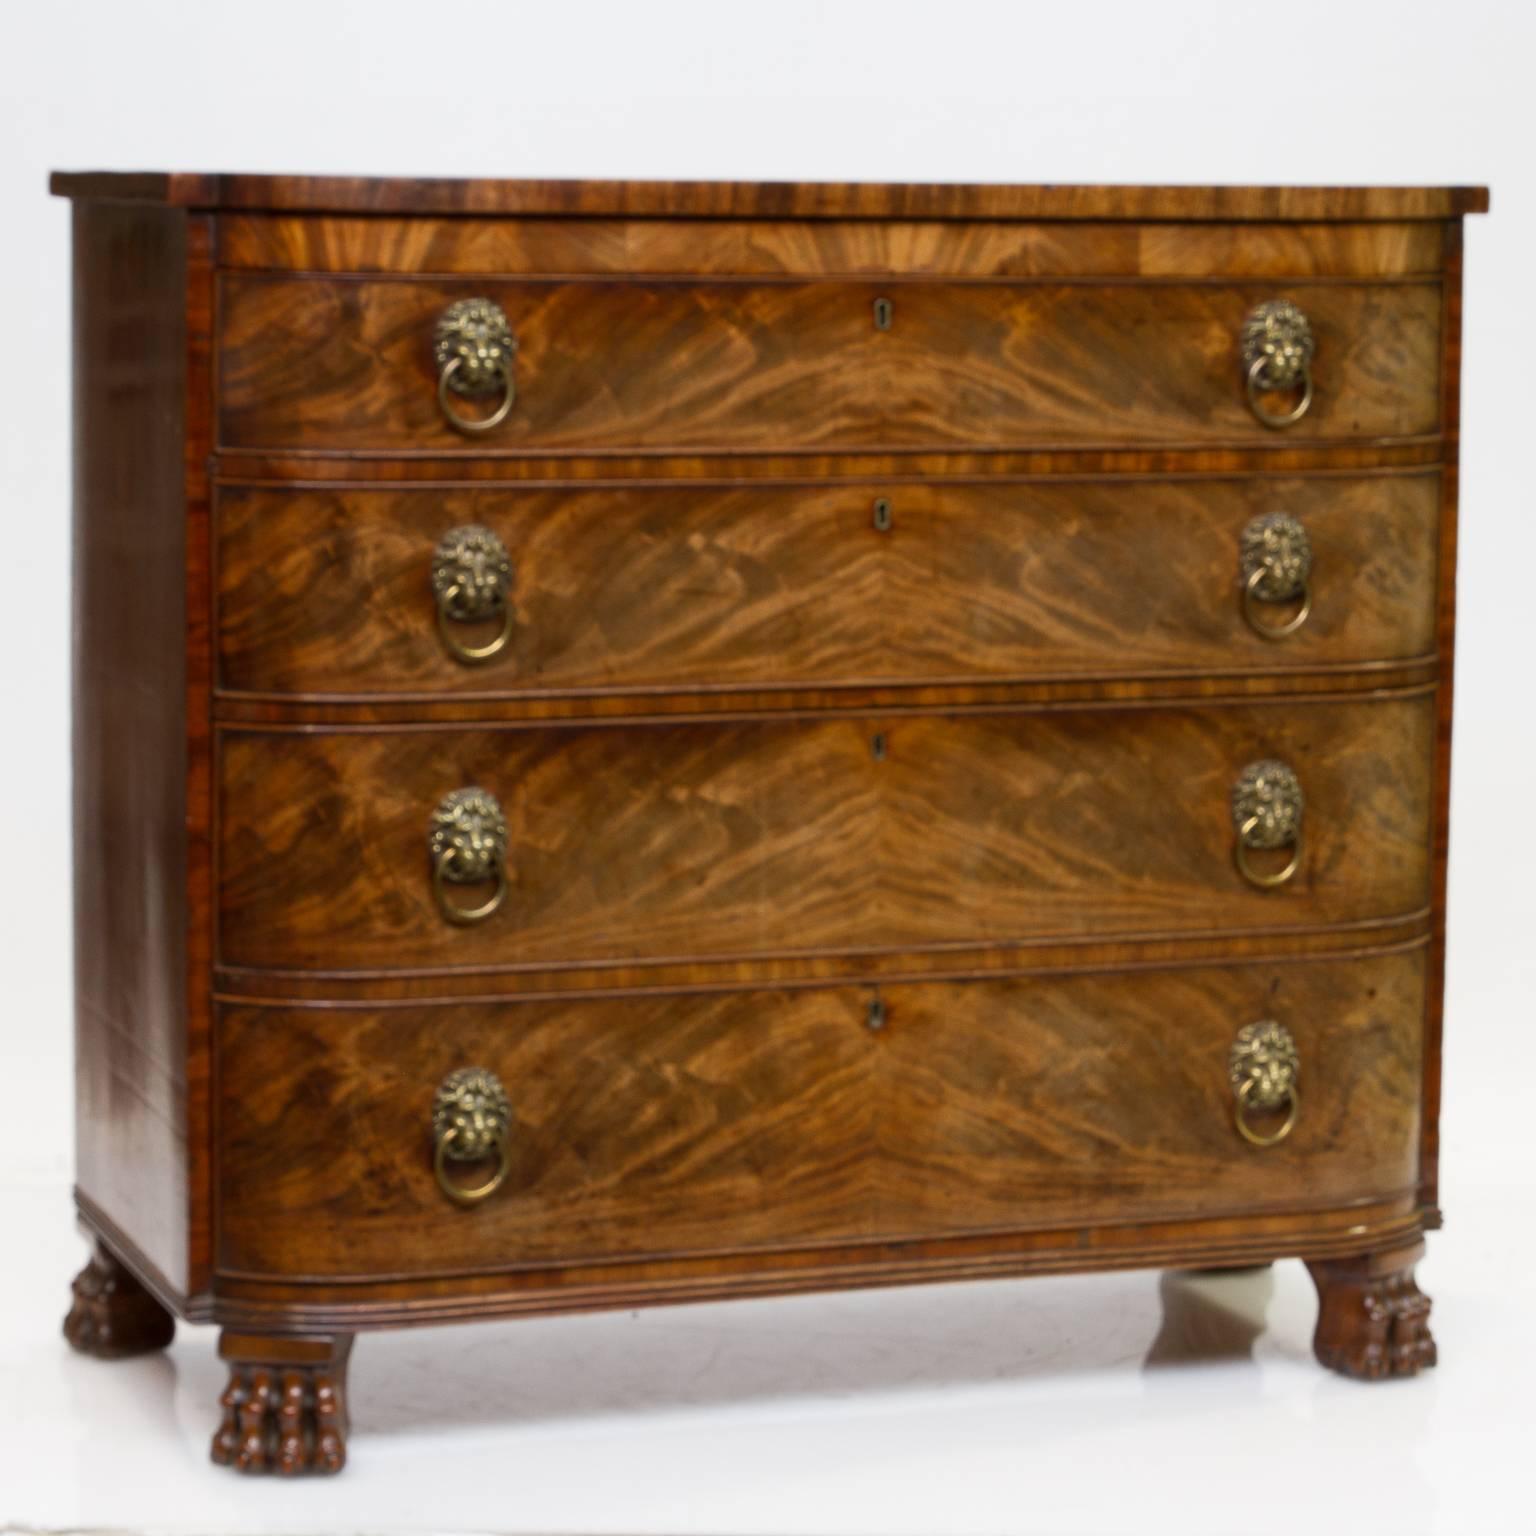 Early 19th century Scottish mahogany chest of drawers with a D-end shape. This meaning looking at the chest from side top view it has a look of the letter D. 
This is chest is from the Regency period or George IV. There are four highly figured